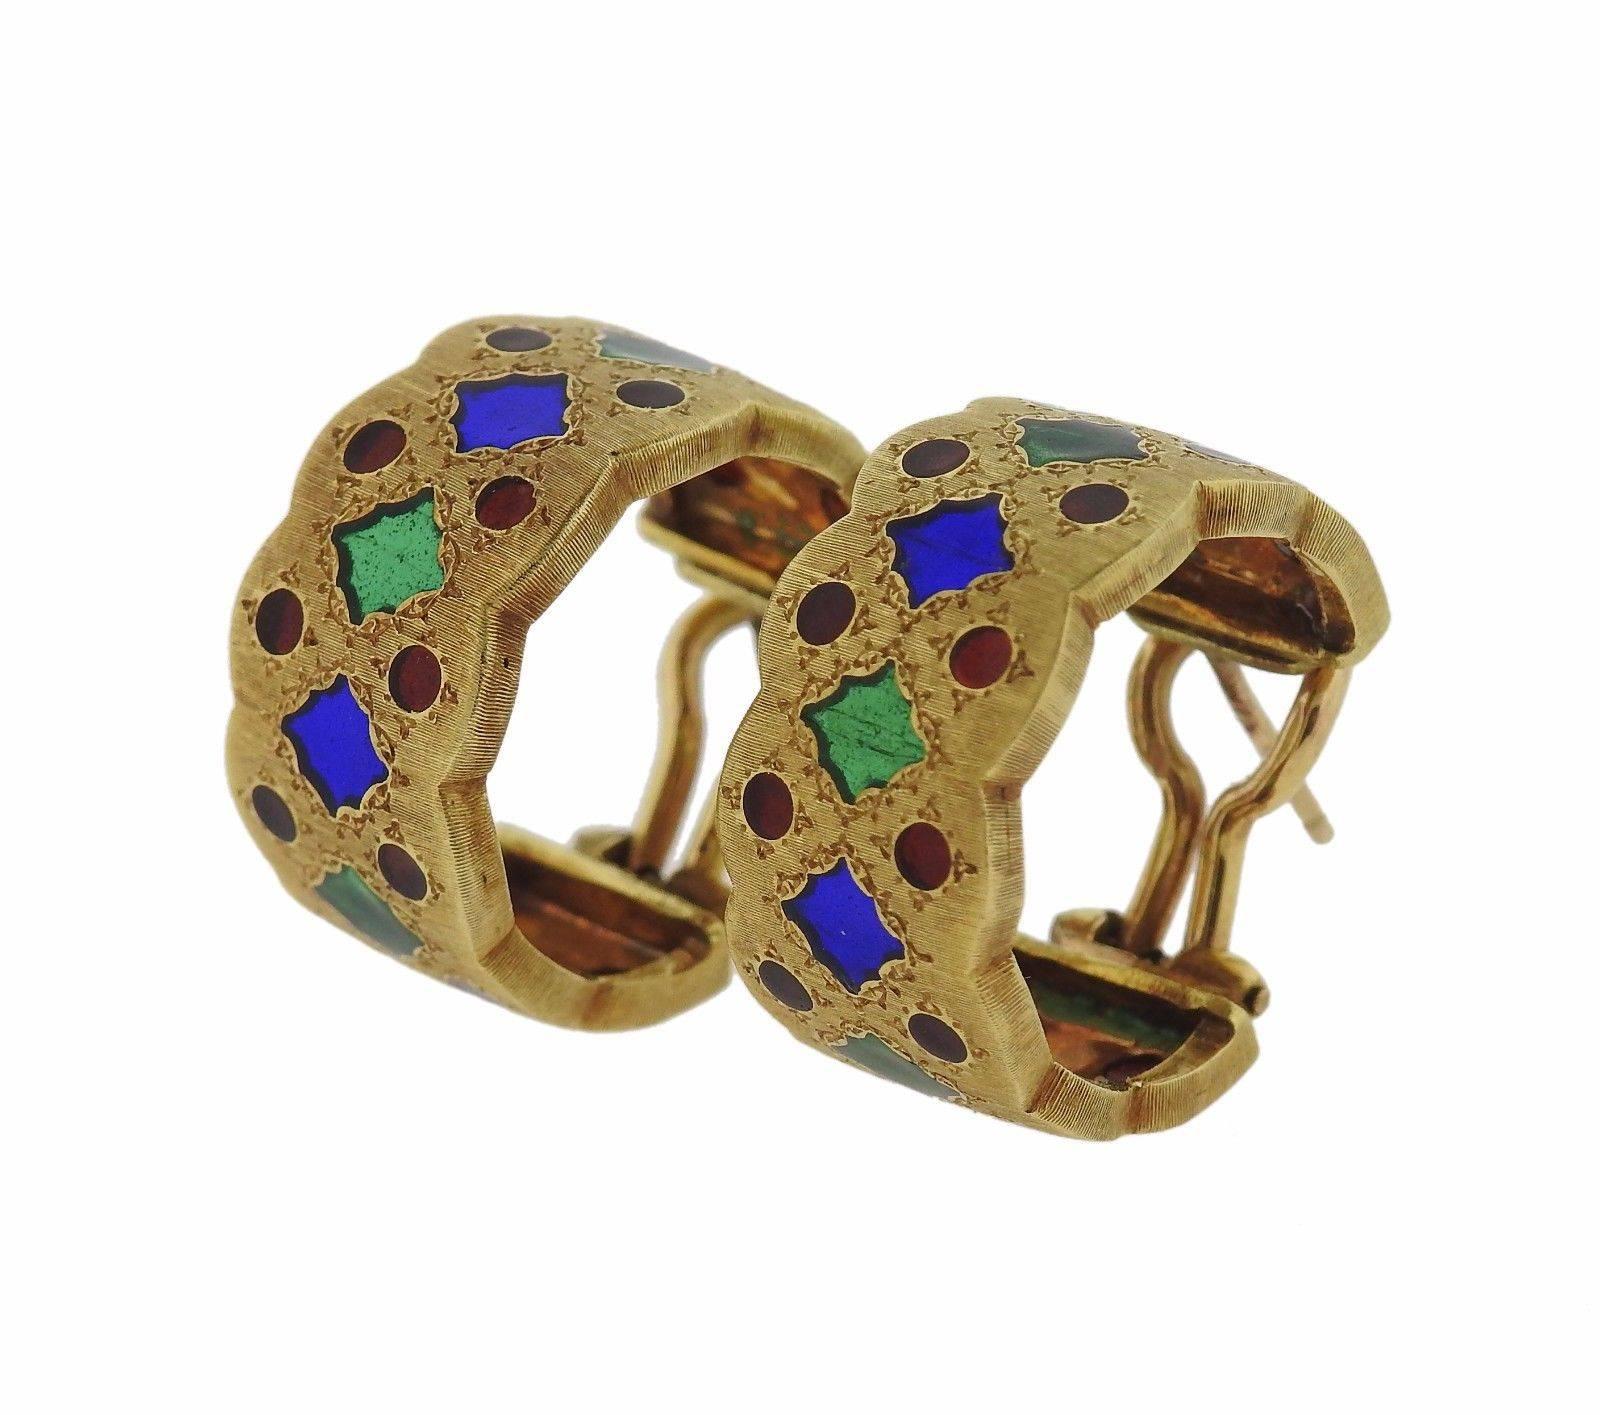 A pair of 18k yellow gold earrings adorned with plique-a-jour enamel.  The earrings are 21mm in diameter and 11mm wide.  The earrings weigh 16.3 grams.  Marked: Buccellati, Italy, k18.